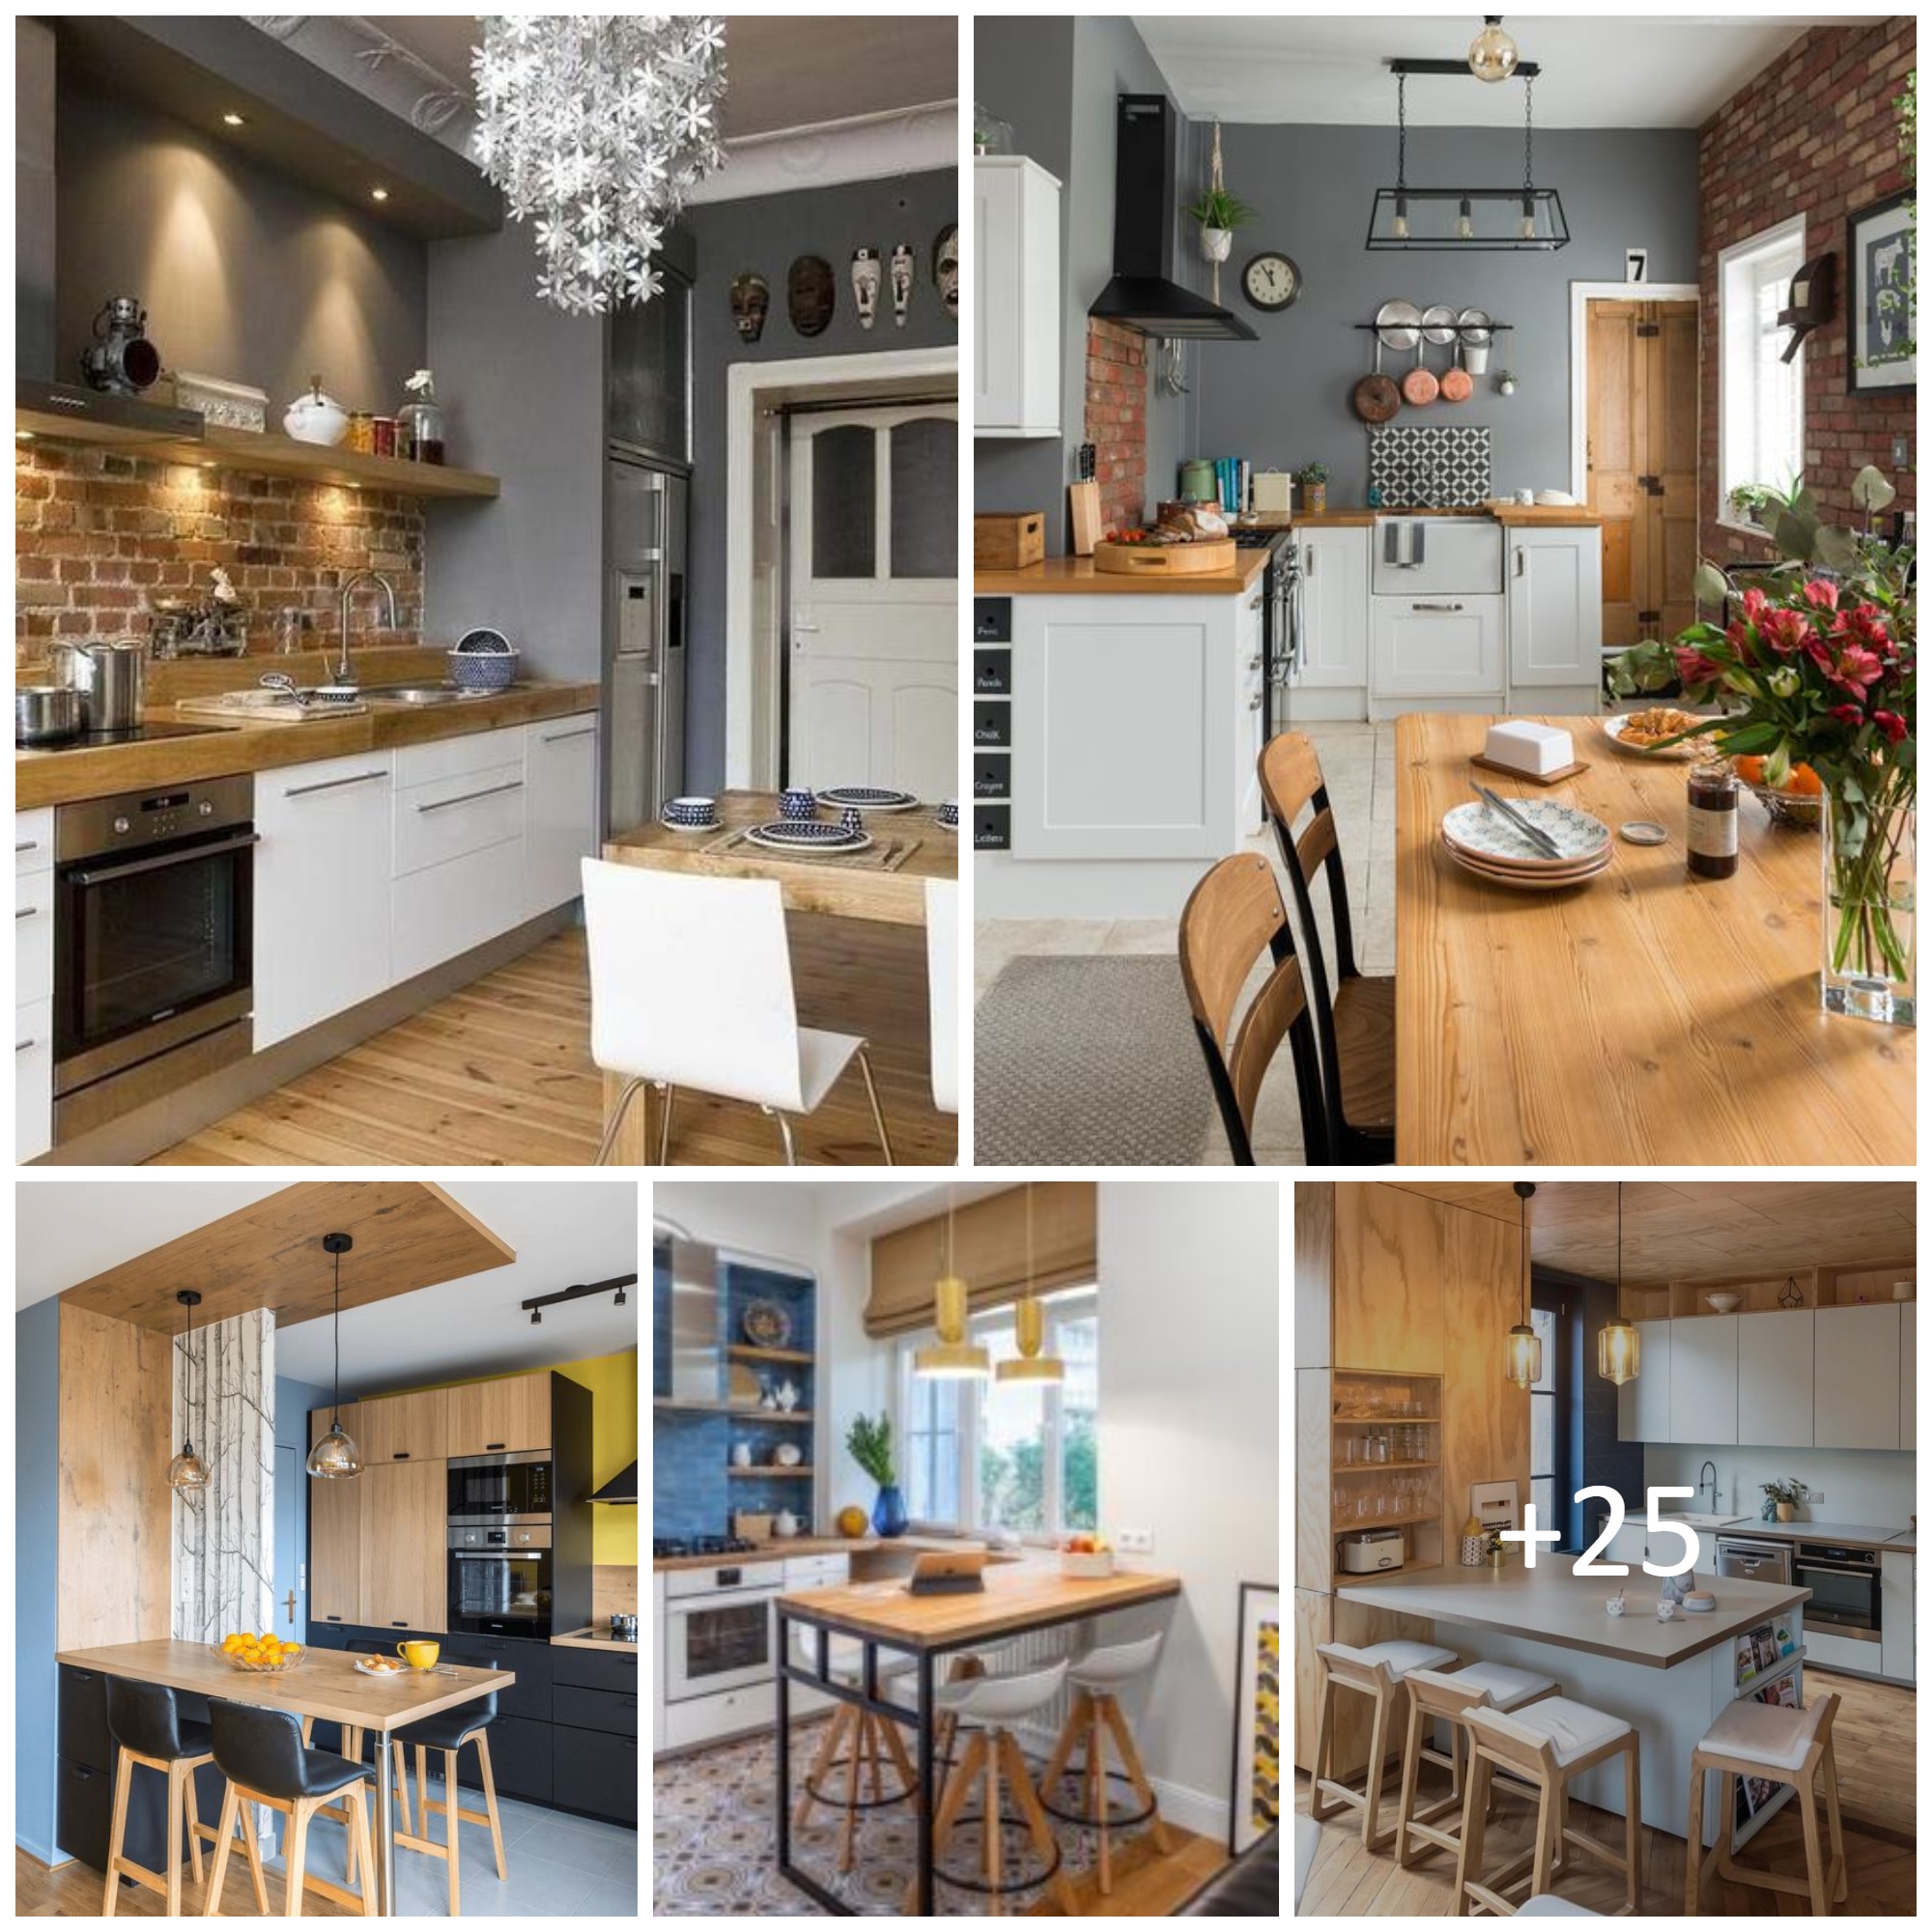 Eat-In Kitchen Designs You’ll Love